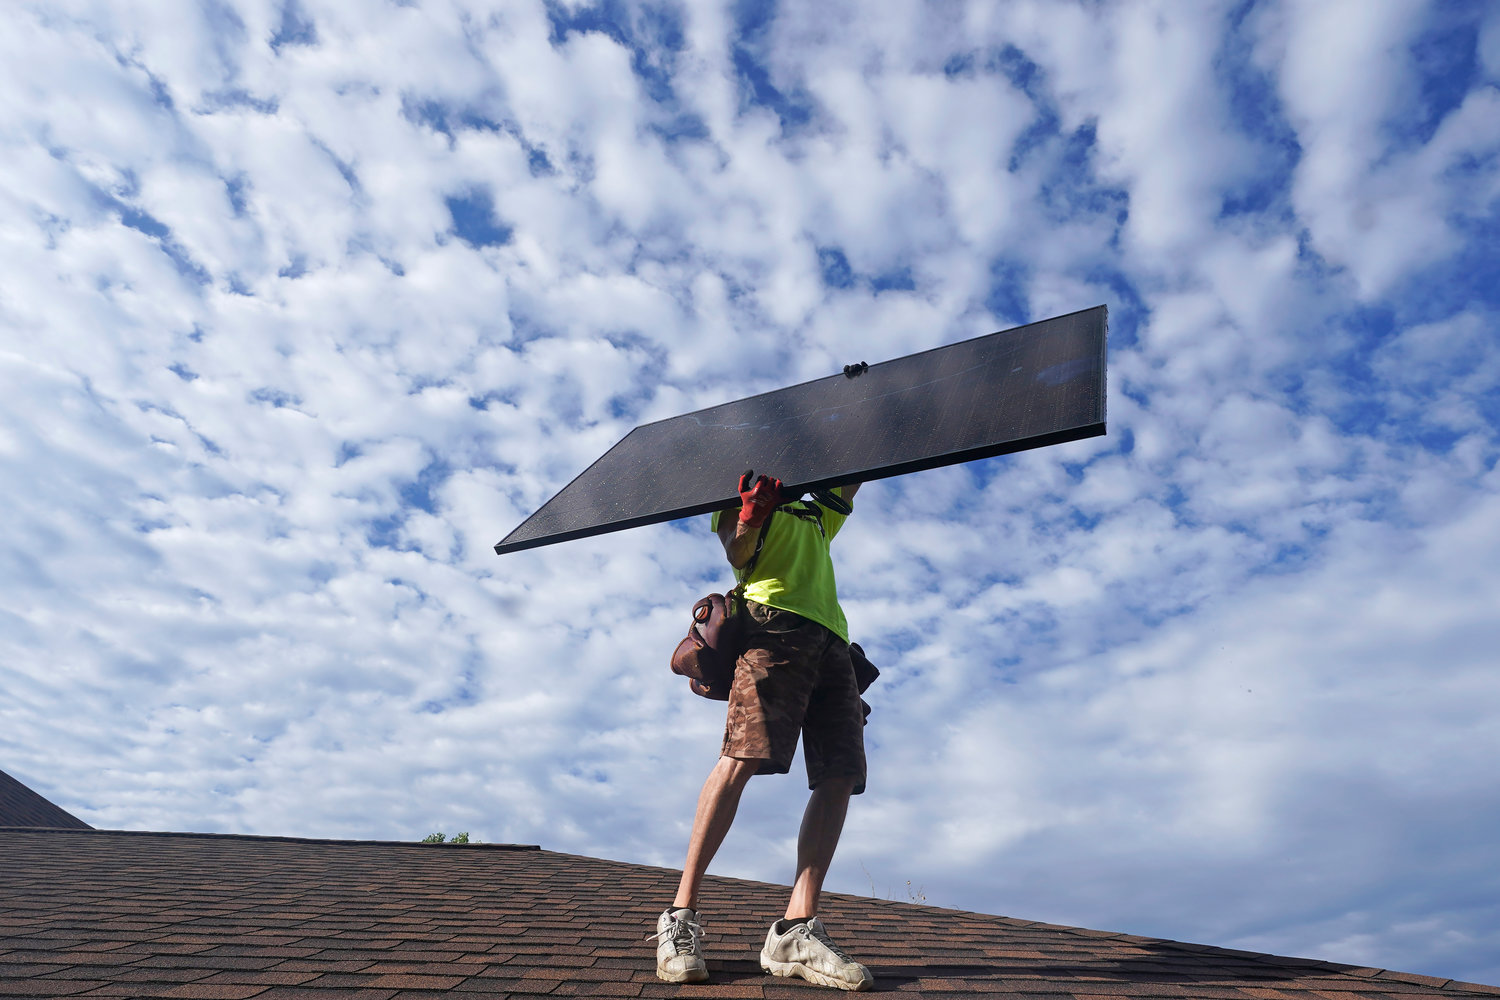 A workman from Power Shift Solar installed a solar panel in Salt Lake City earlier this month. The crux of the long-delayed but transformative climate change passed by Congress last week is to use incentives to accelerate the expansion of clean energy such as wind and solar power, speeding the transition away from the oil, coal and gas that largely cause climate change.